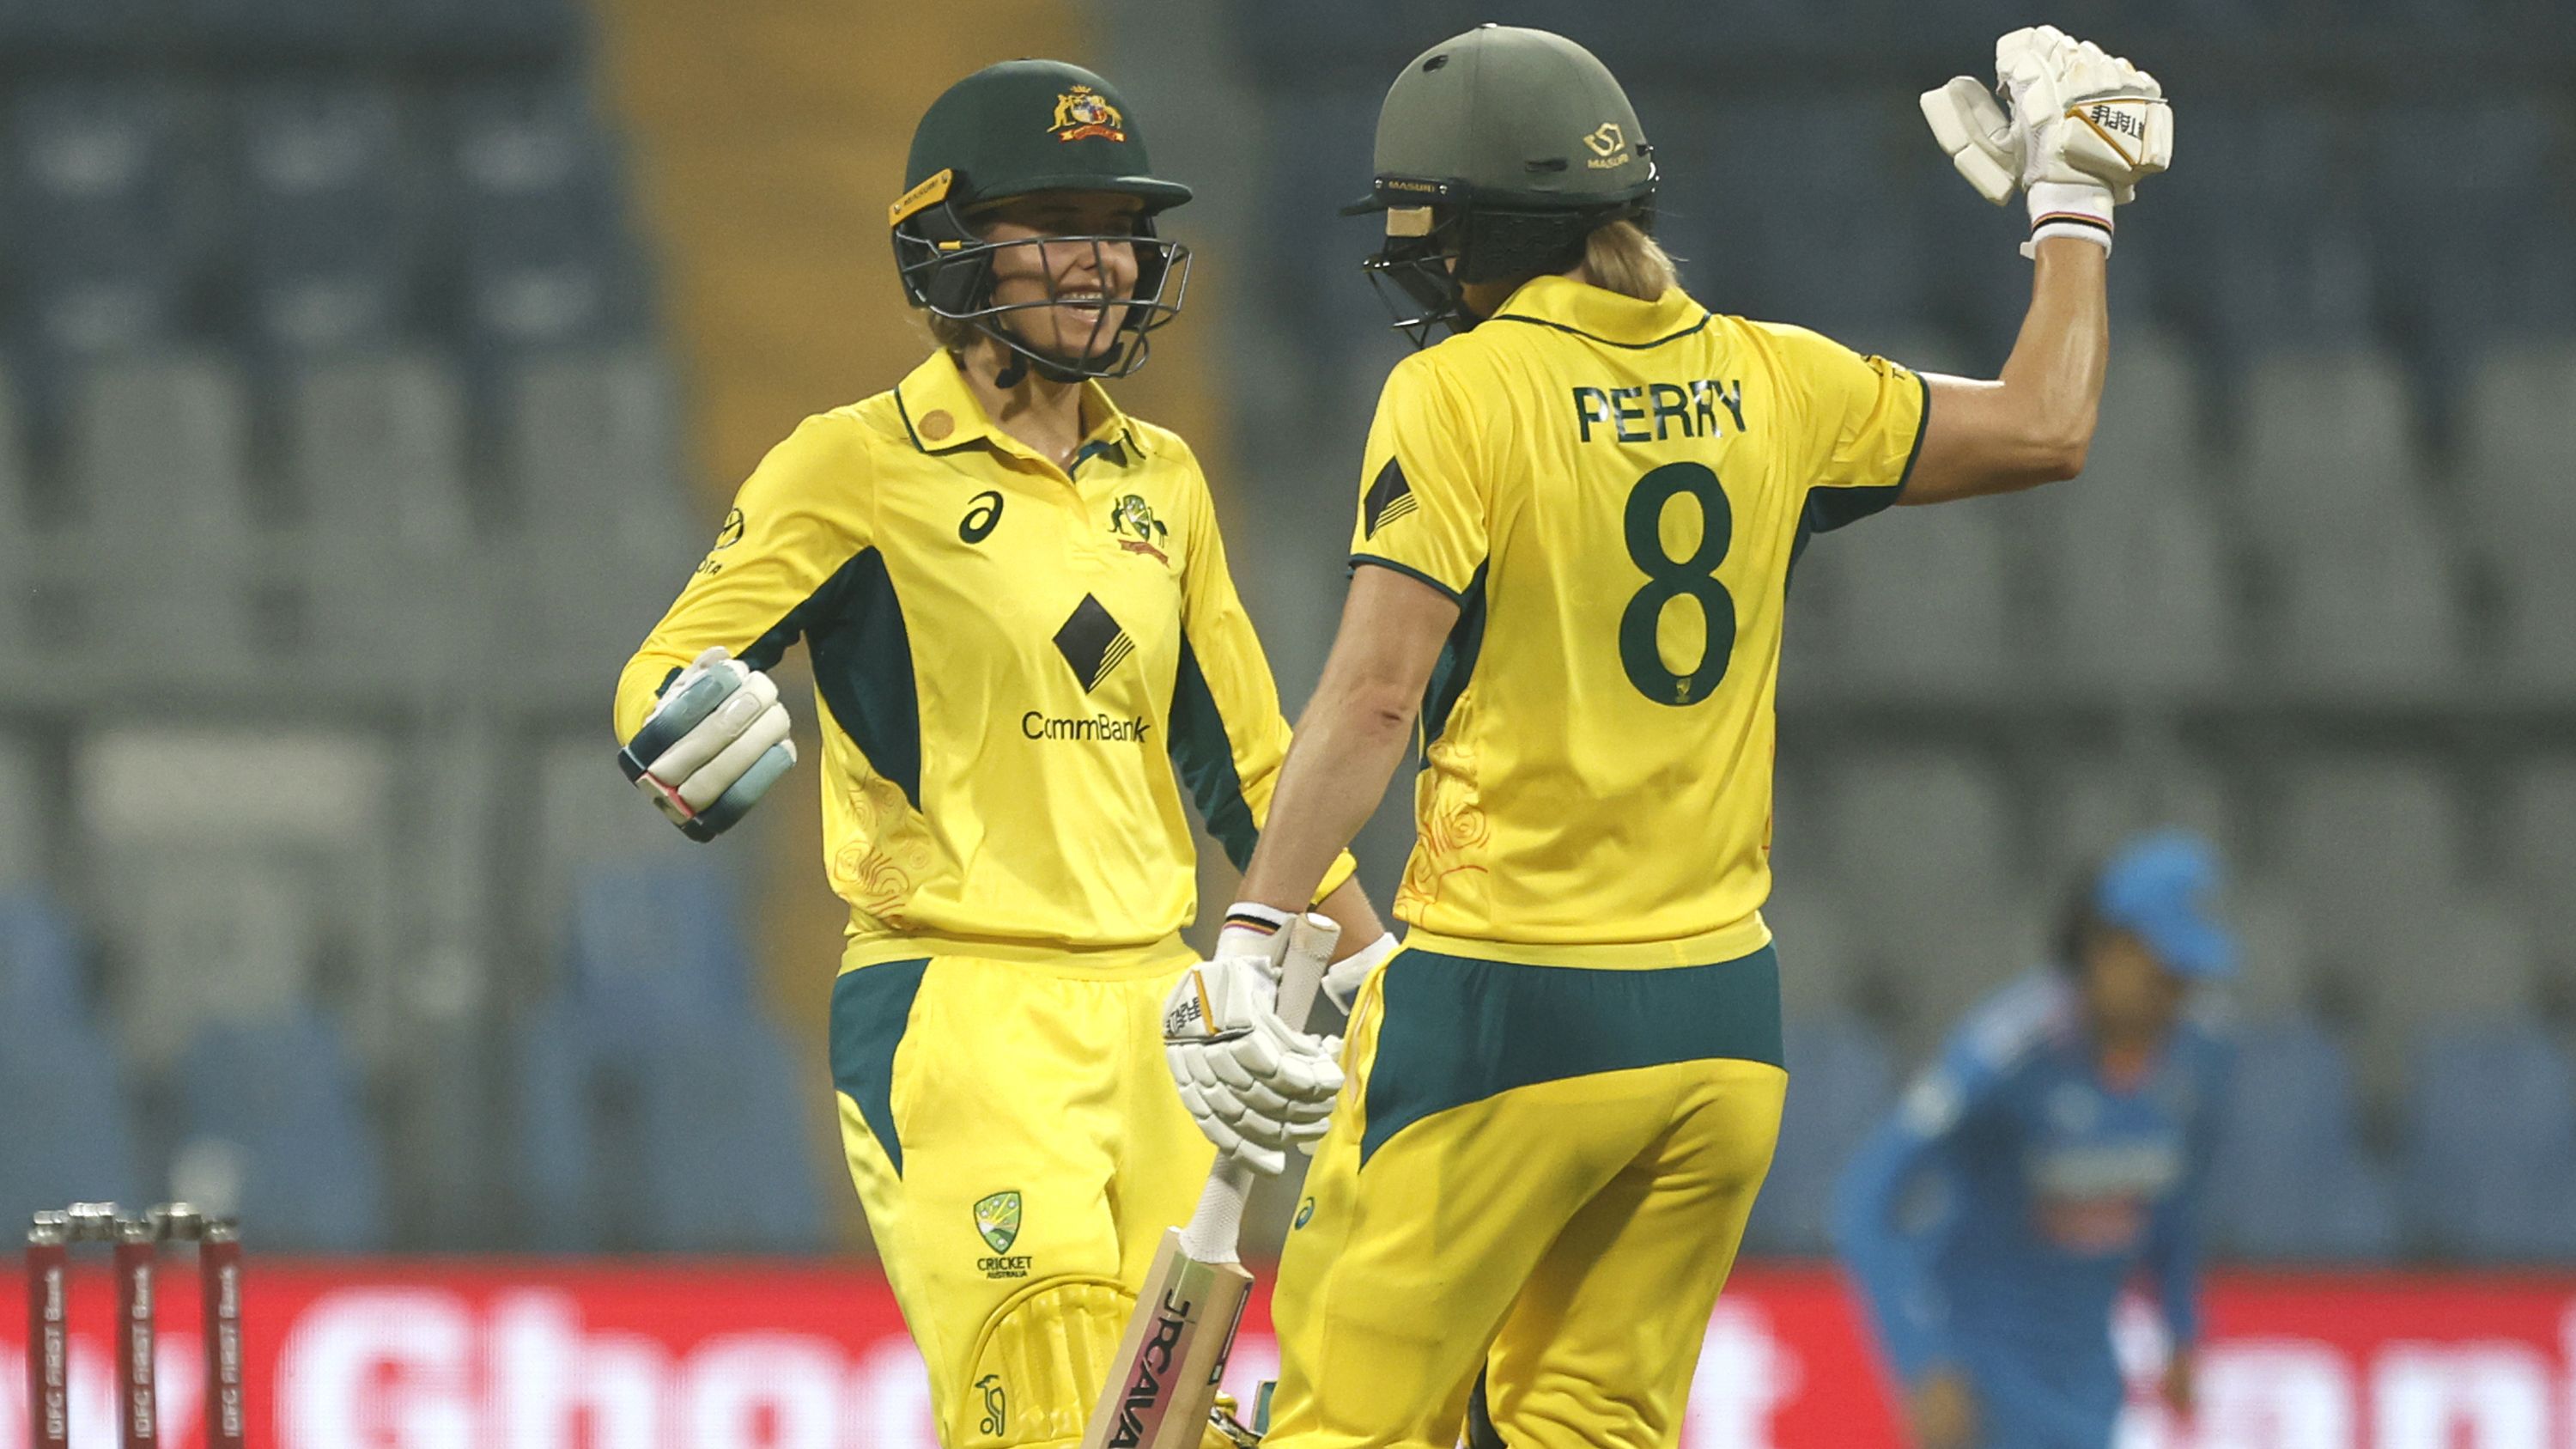 Phoebe Litchfield of Australia celebrates after scoring a 50 with Ellyse Perry.